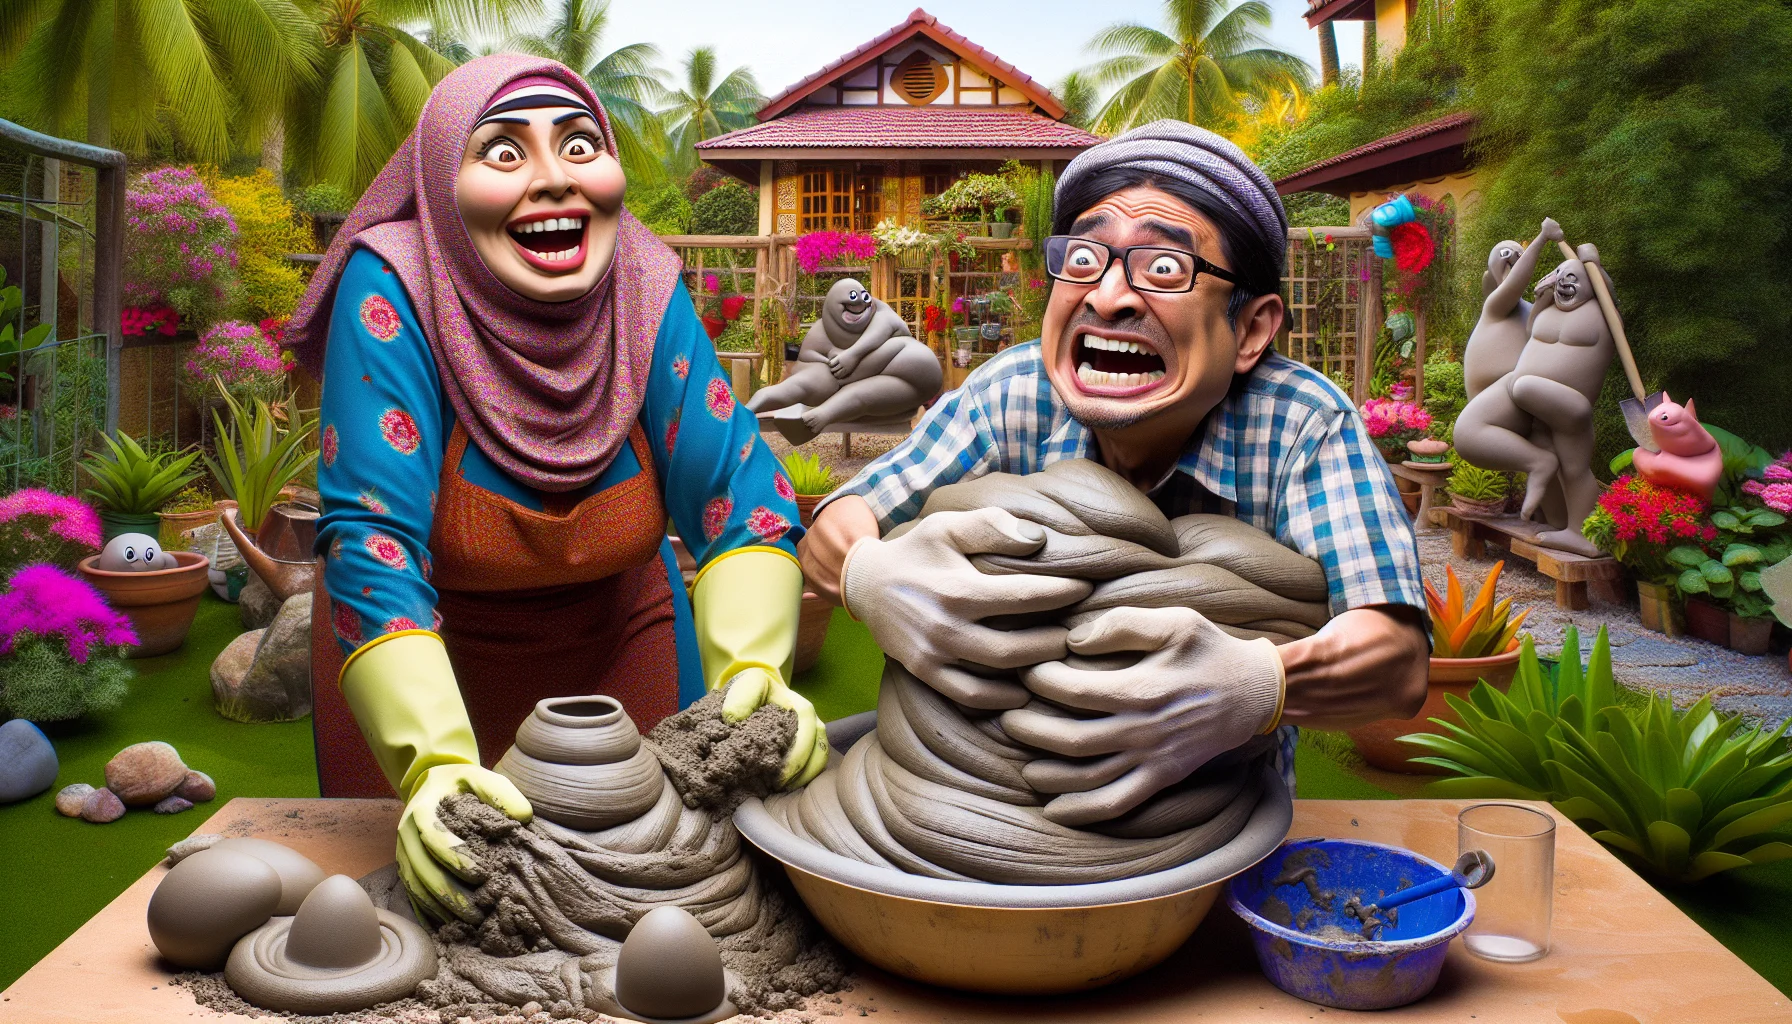 A humorously exaggerated scene of Hypertufa mold preparation for gardening. In the image's foreground, a Middle-Eastern woman with gardening gloves is making Hypertufa mix with a gleeful expression. Near her, a South Asian man is struggling comically with overly large Hypertufa molds, teetering as if about to lose balance. In the background, you can see a vibrant garden with a variety of plants in bloom. The overall atmosphere is light-hearted, meant to stir the viewers into appreciating the joy of gardening.